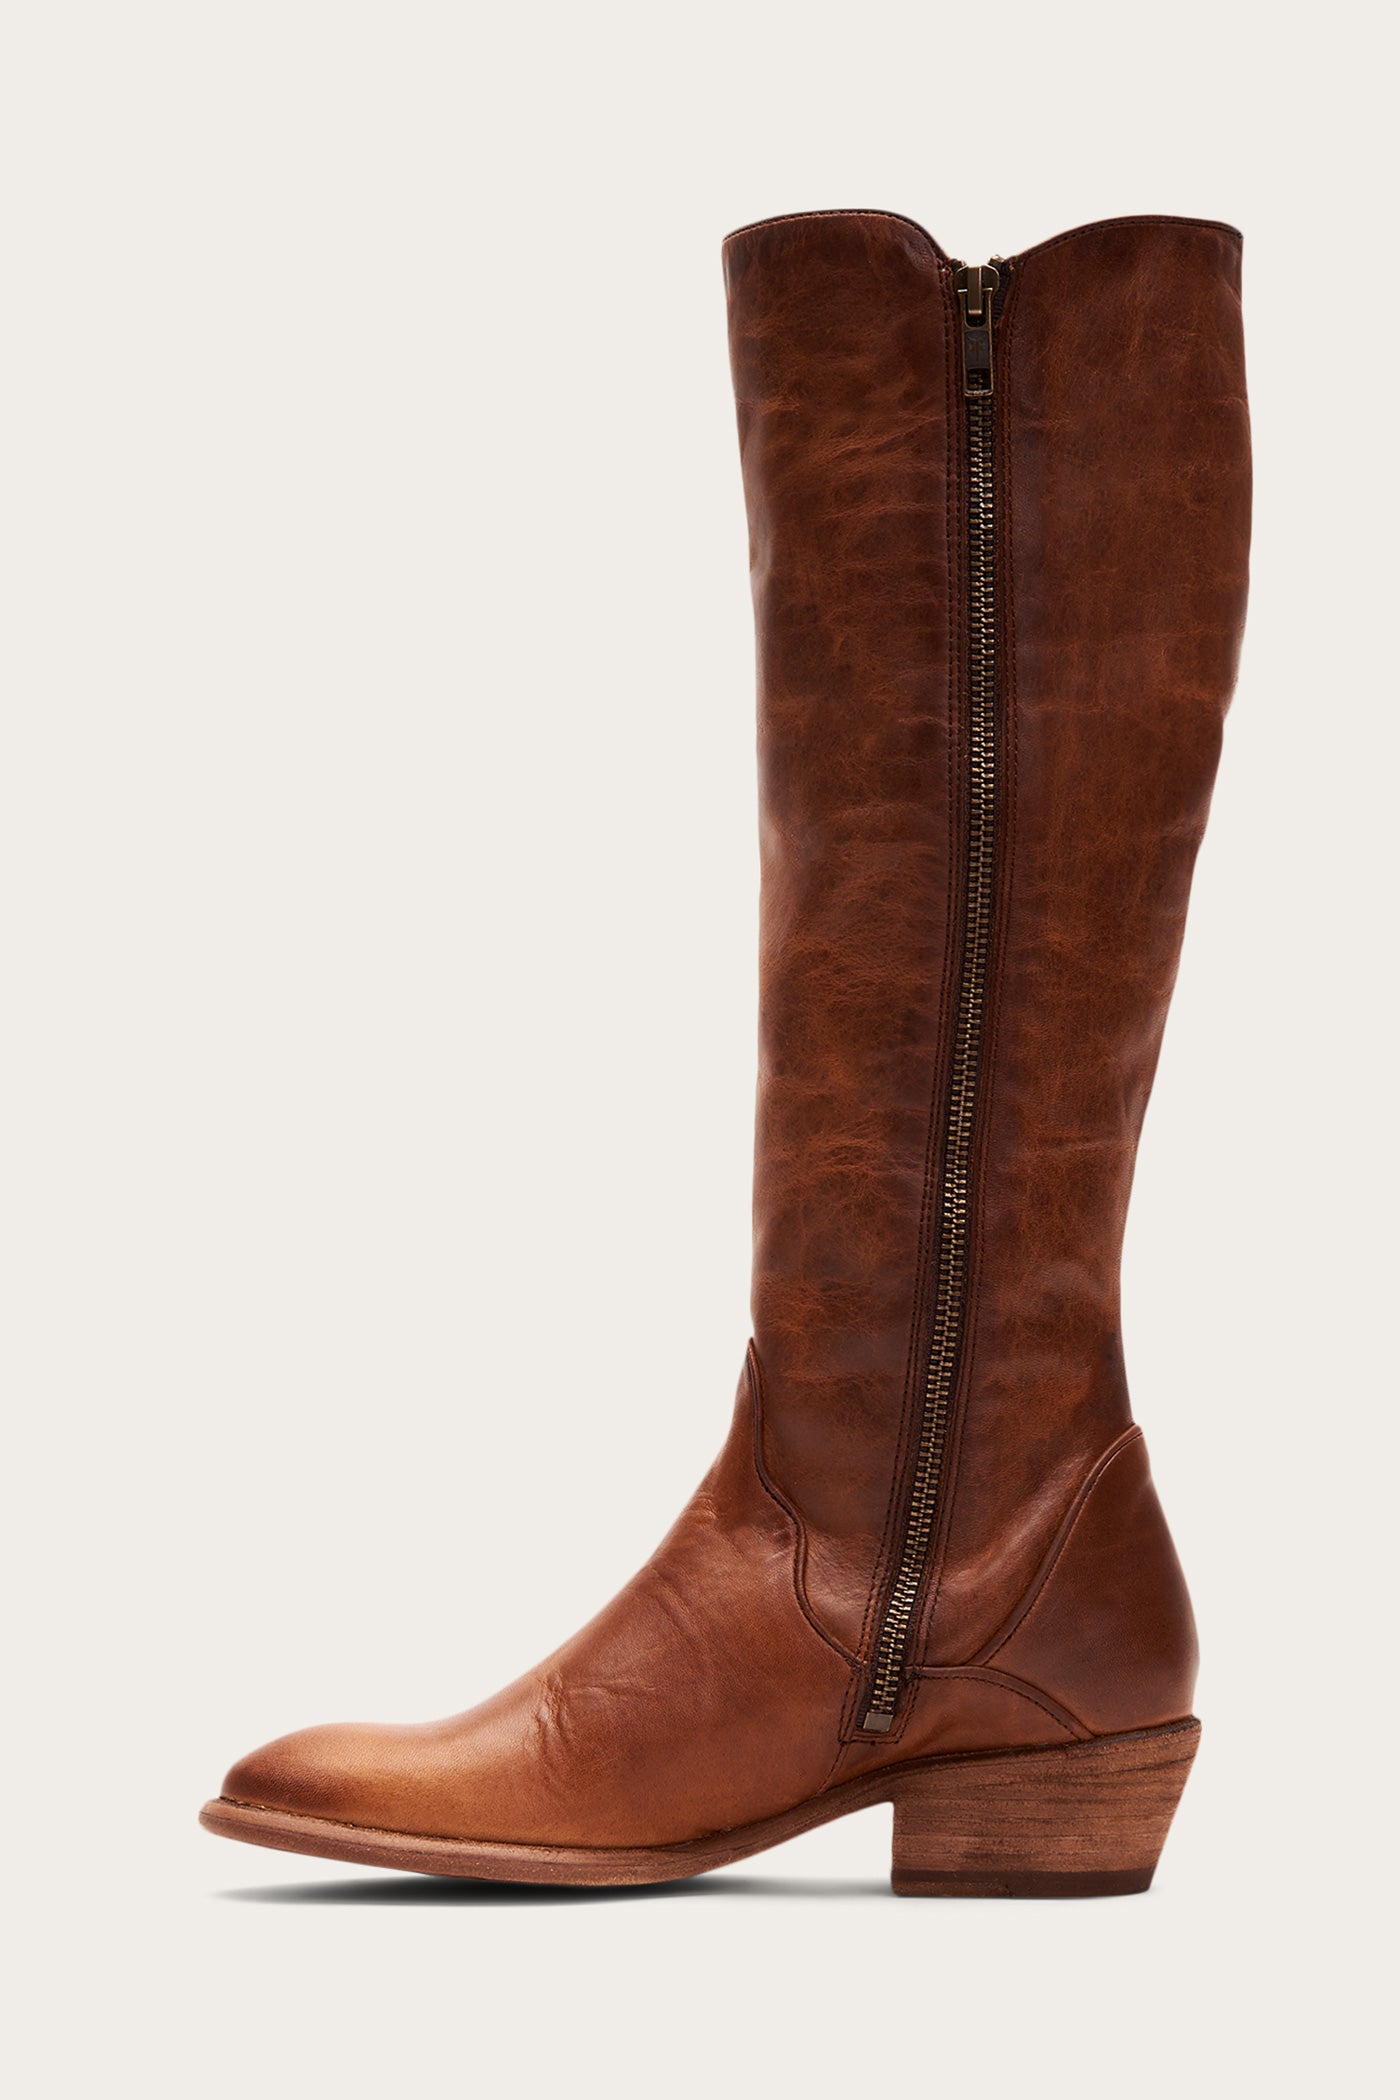 frye carson piping tall boot